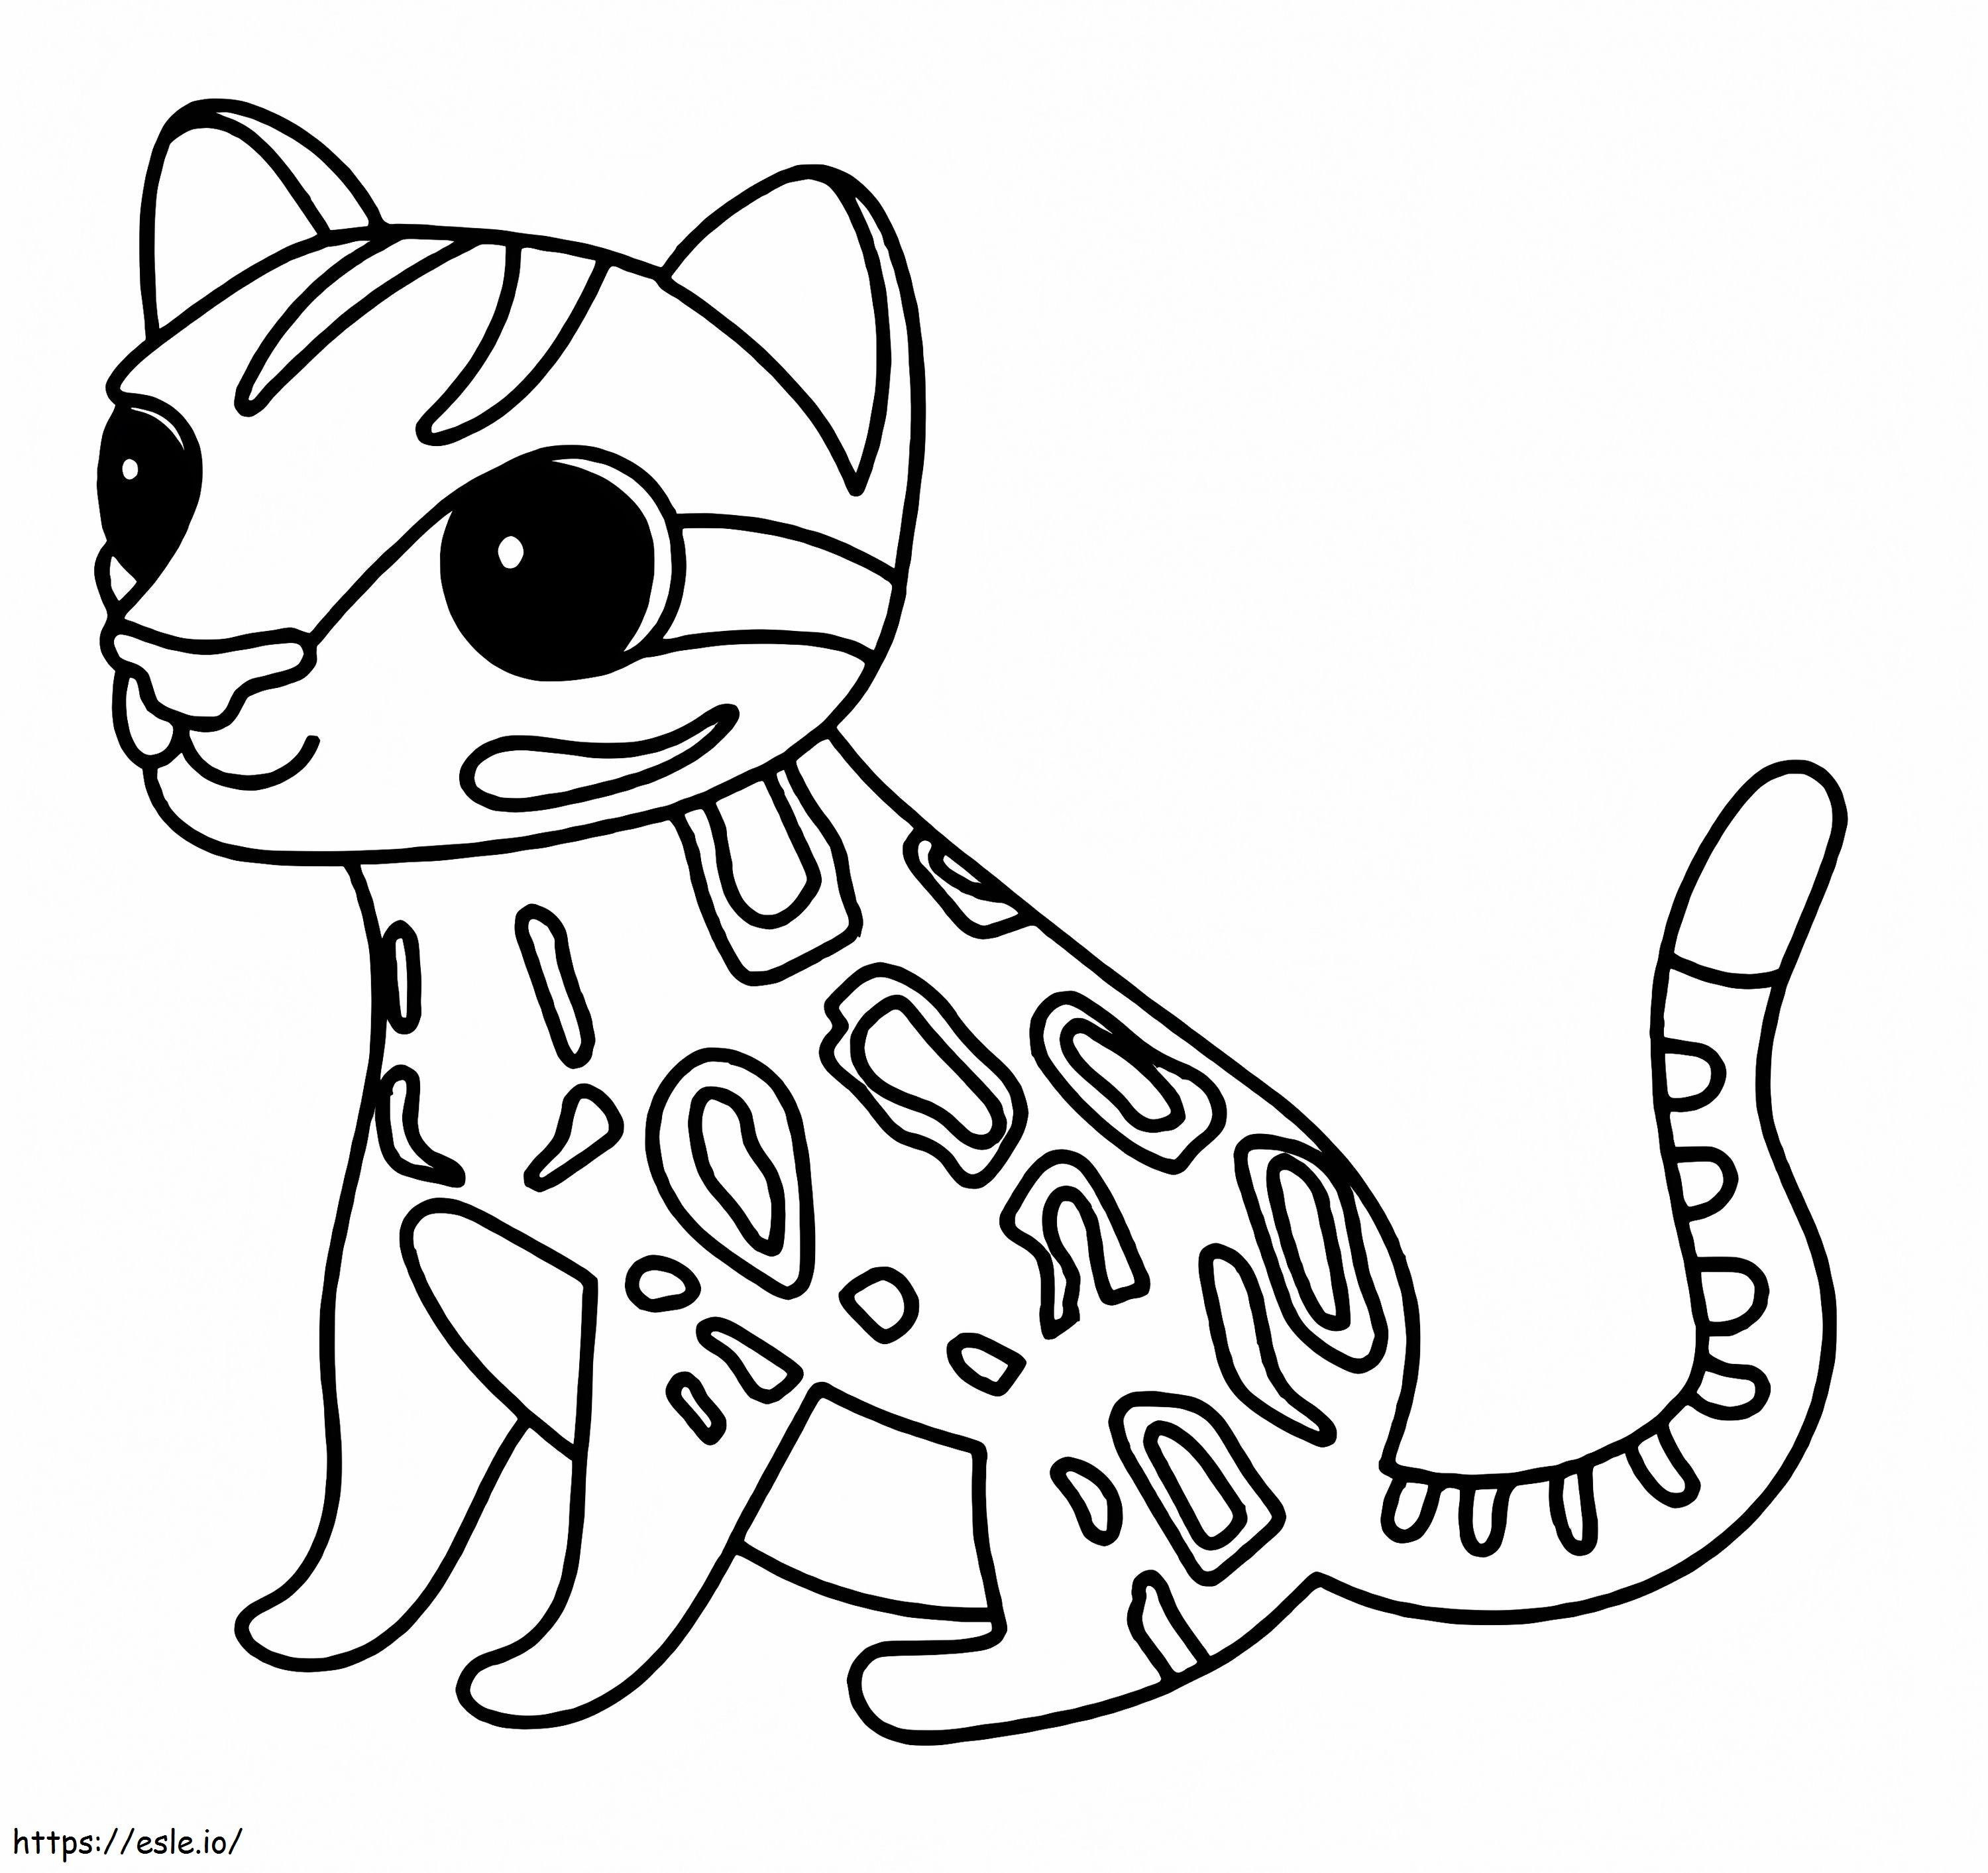 Adorable Ocelot coloring page